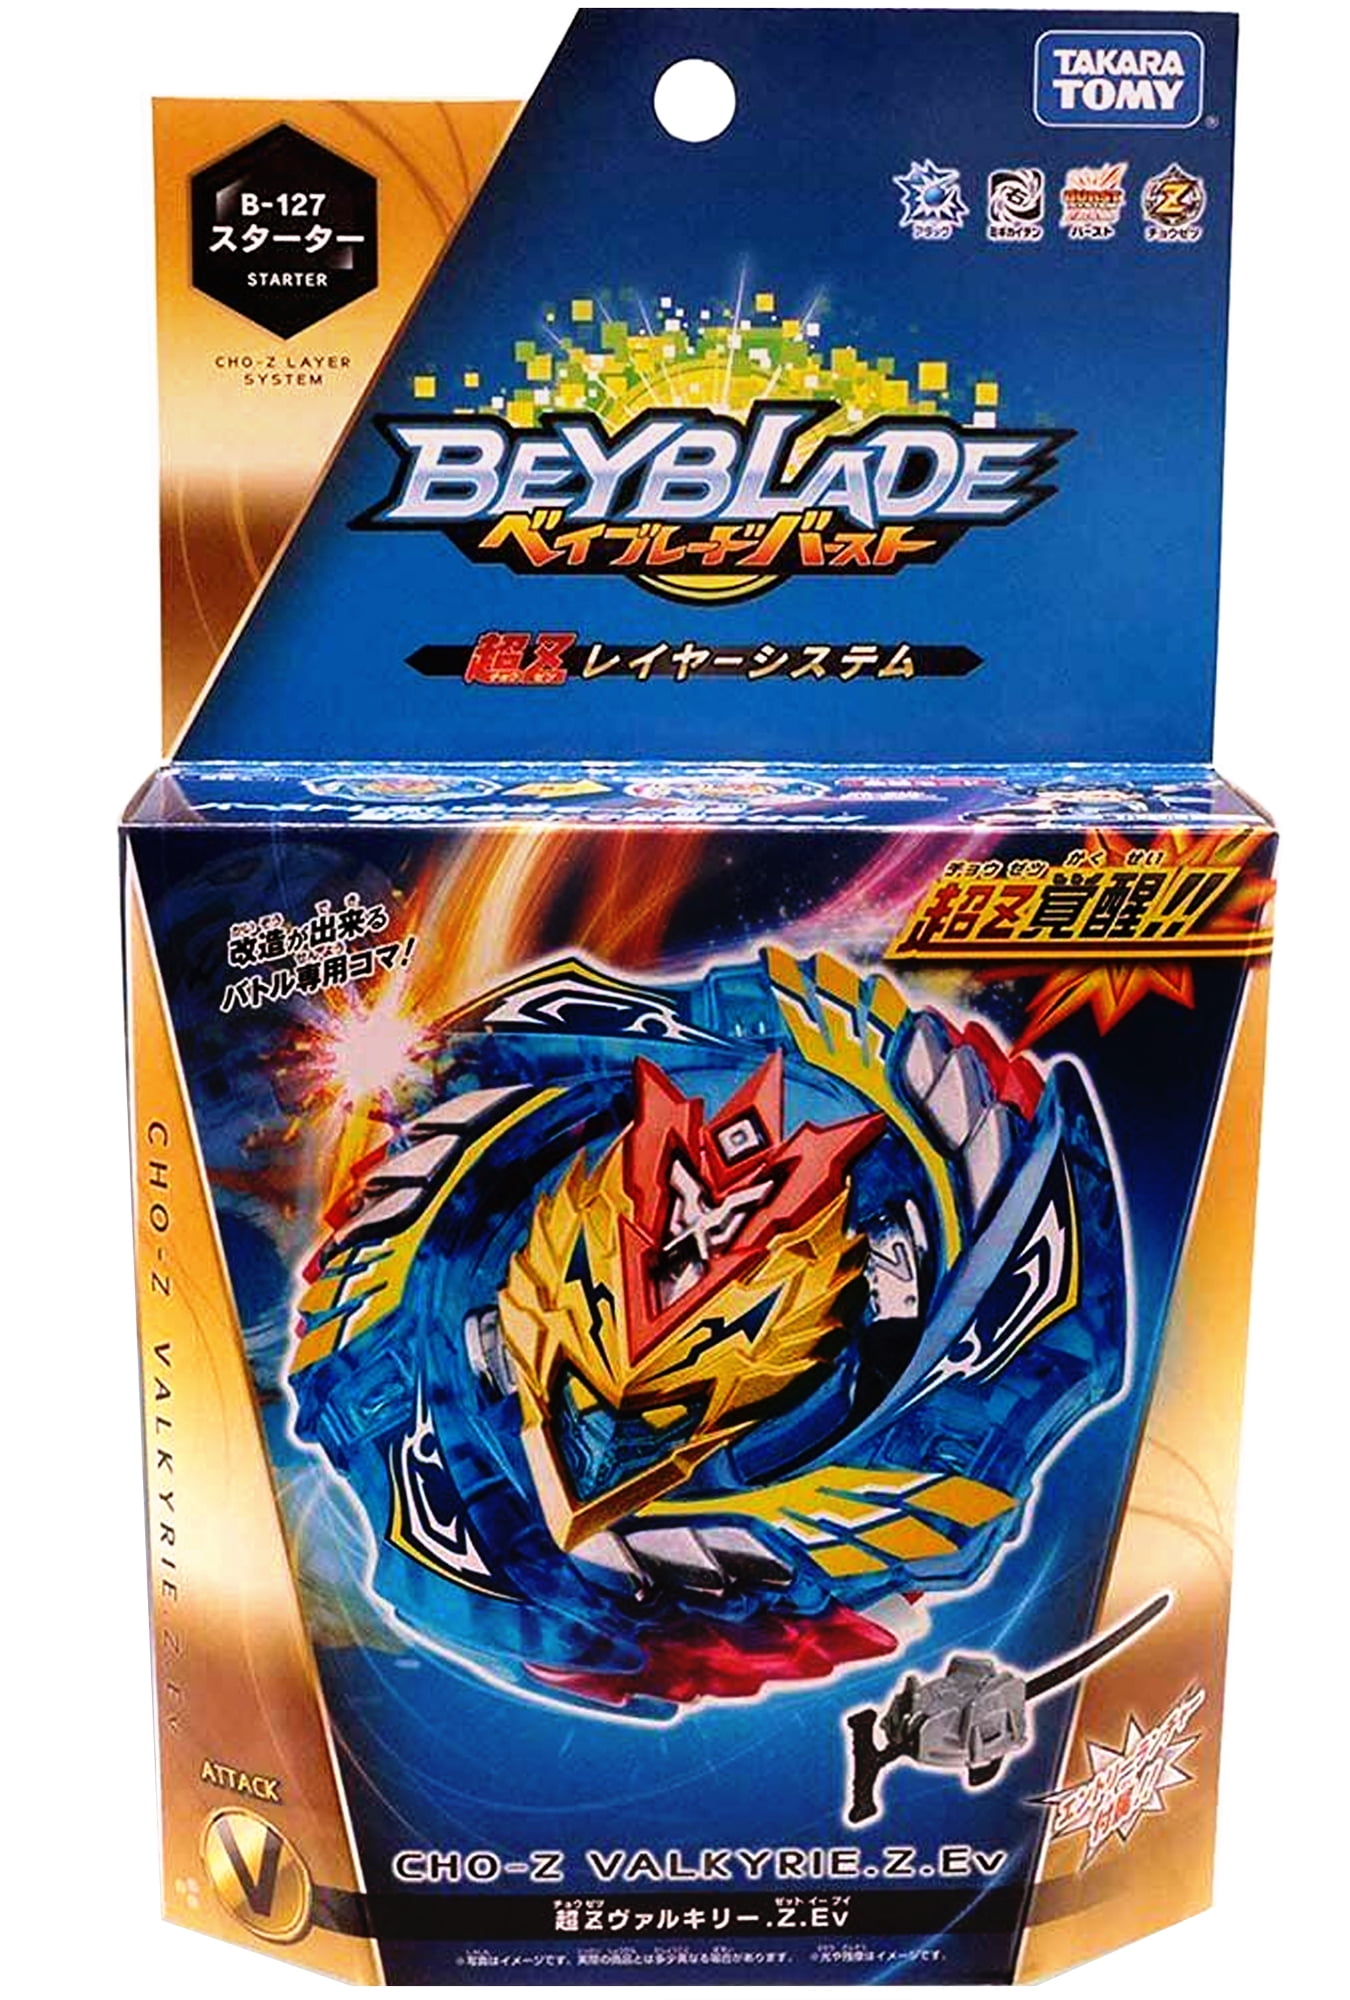 Details about   Takara Tomy Beyblade Burst B-117 Revive Phoenix 10 Friction With Launcher #1